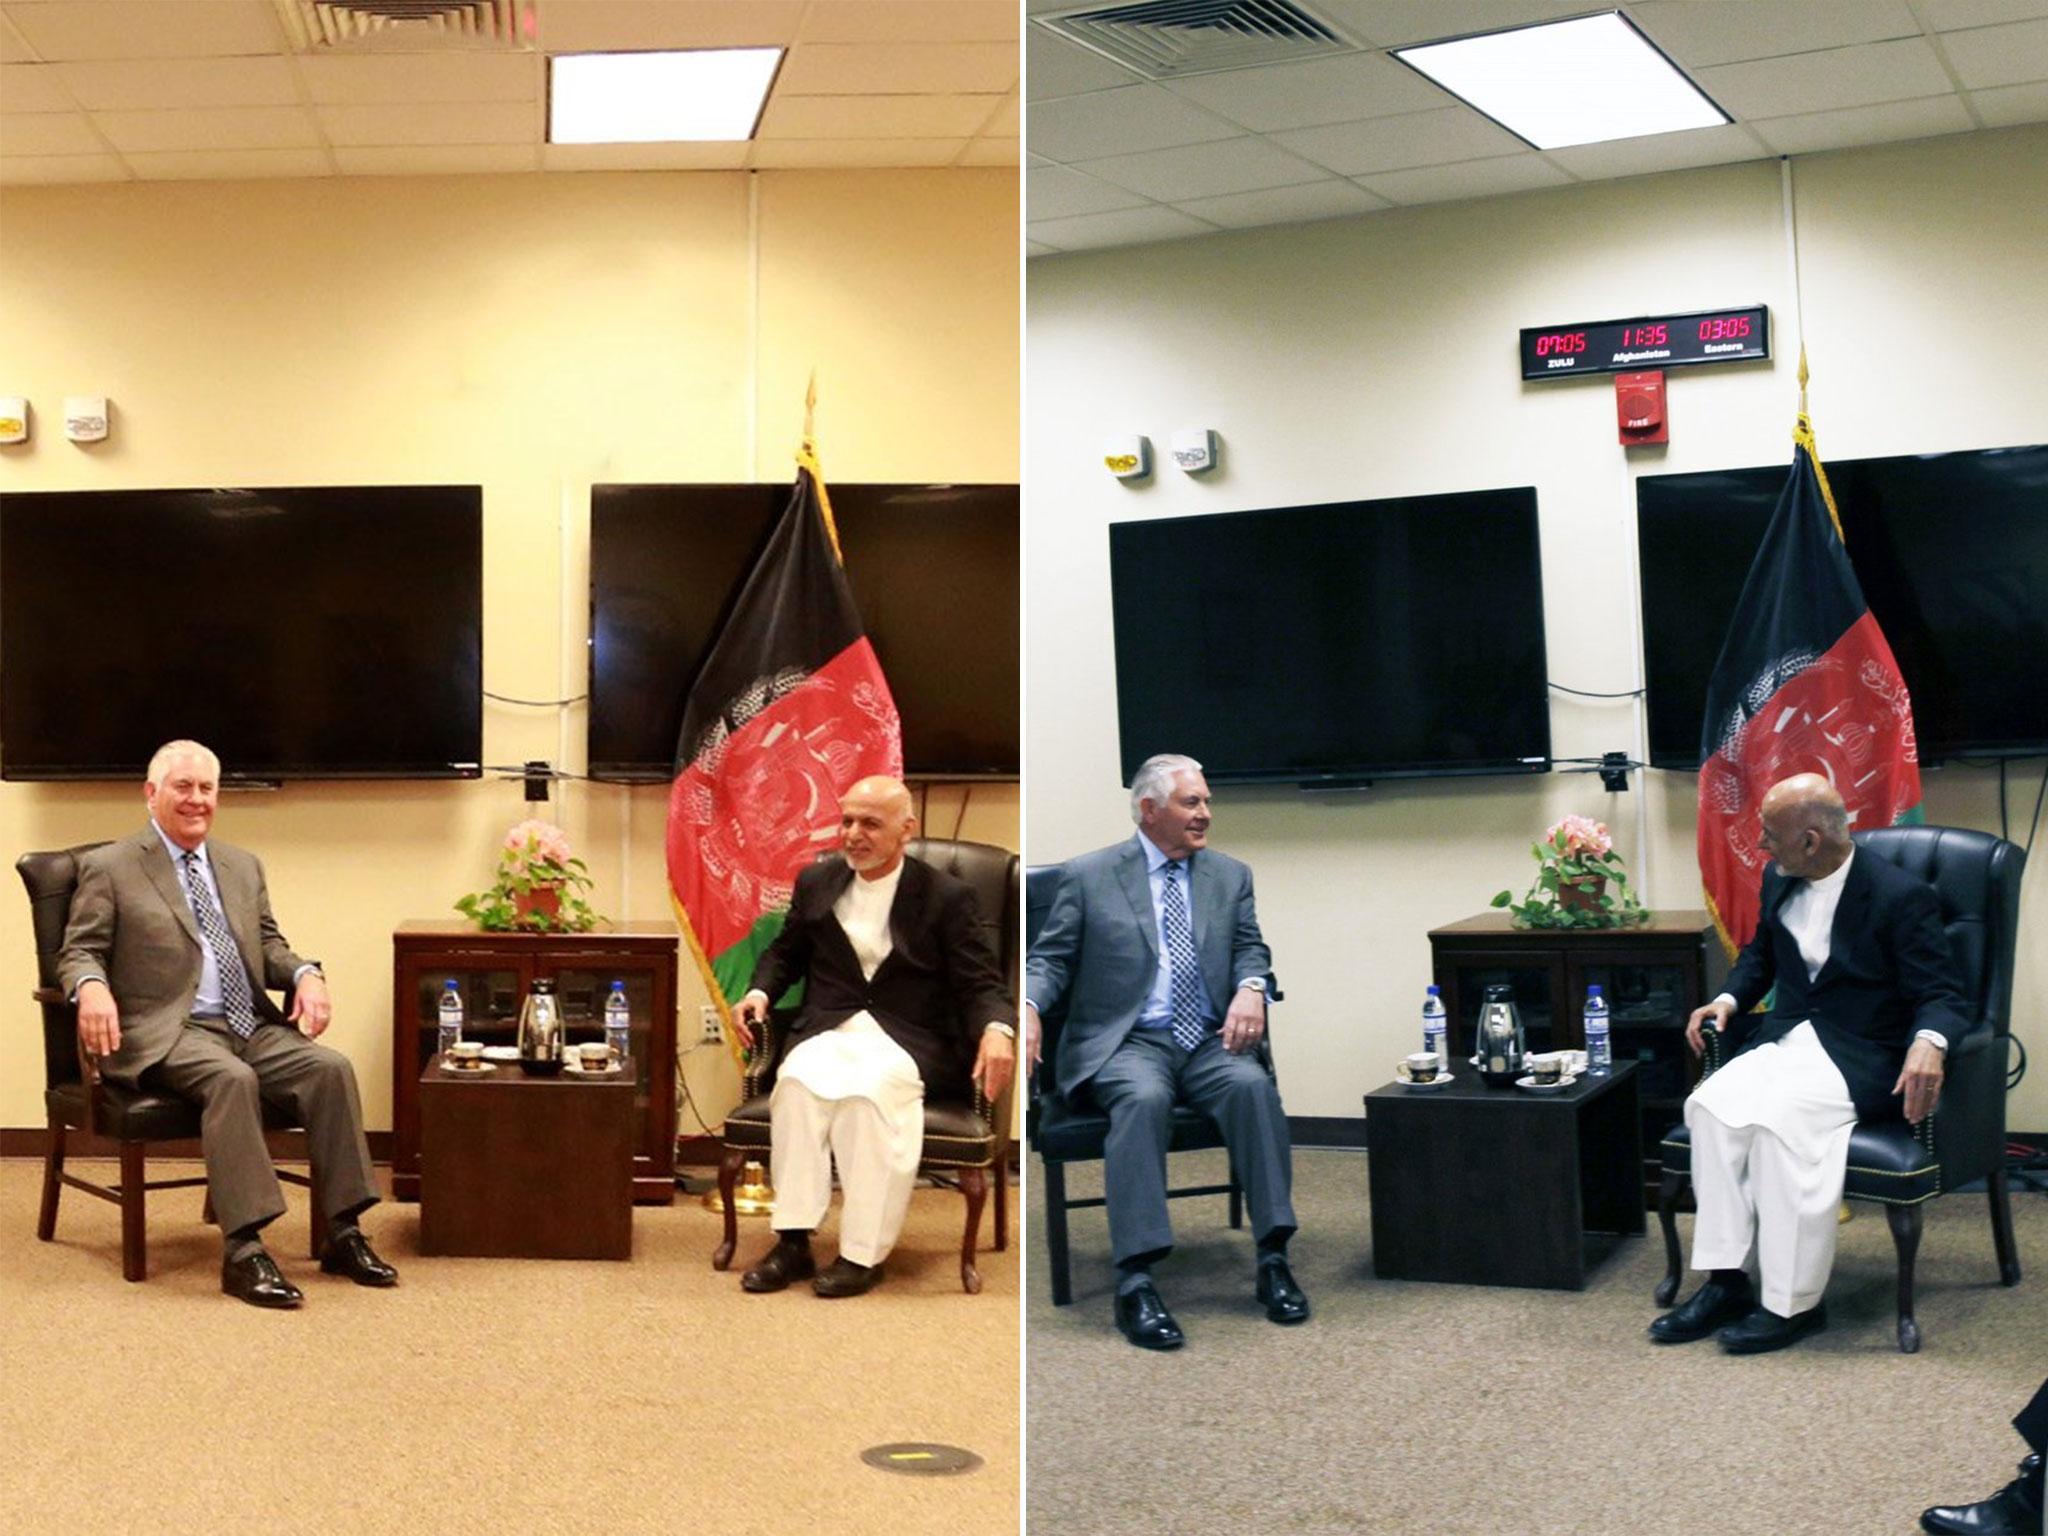 Two official photos showed the same meeting - but with subtle differences